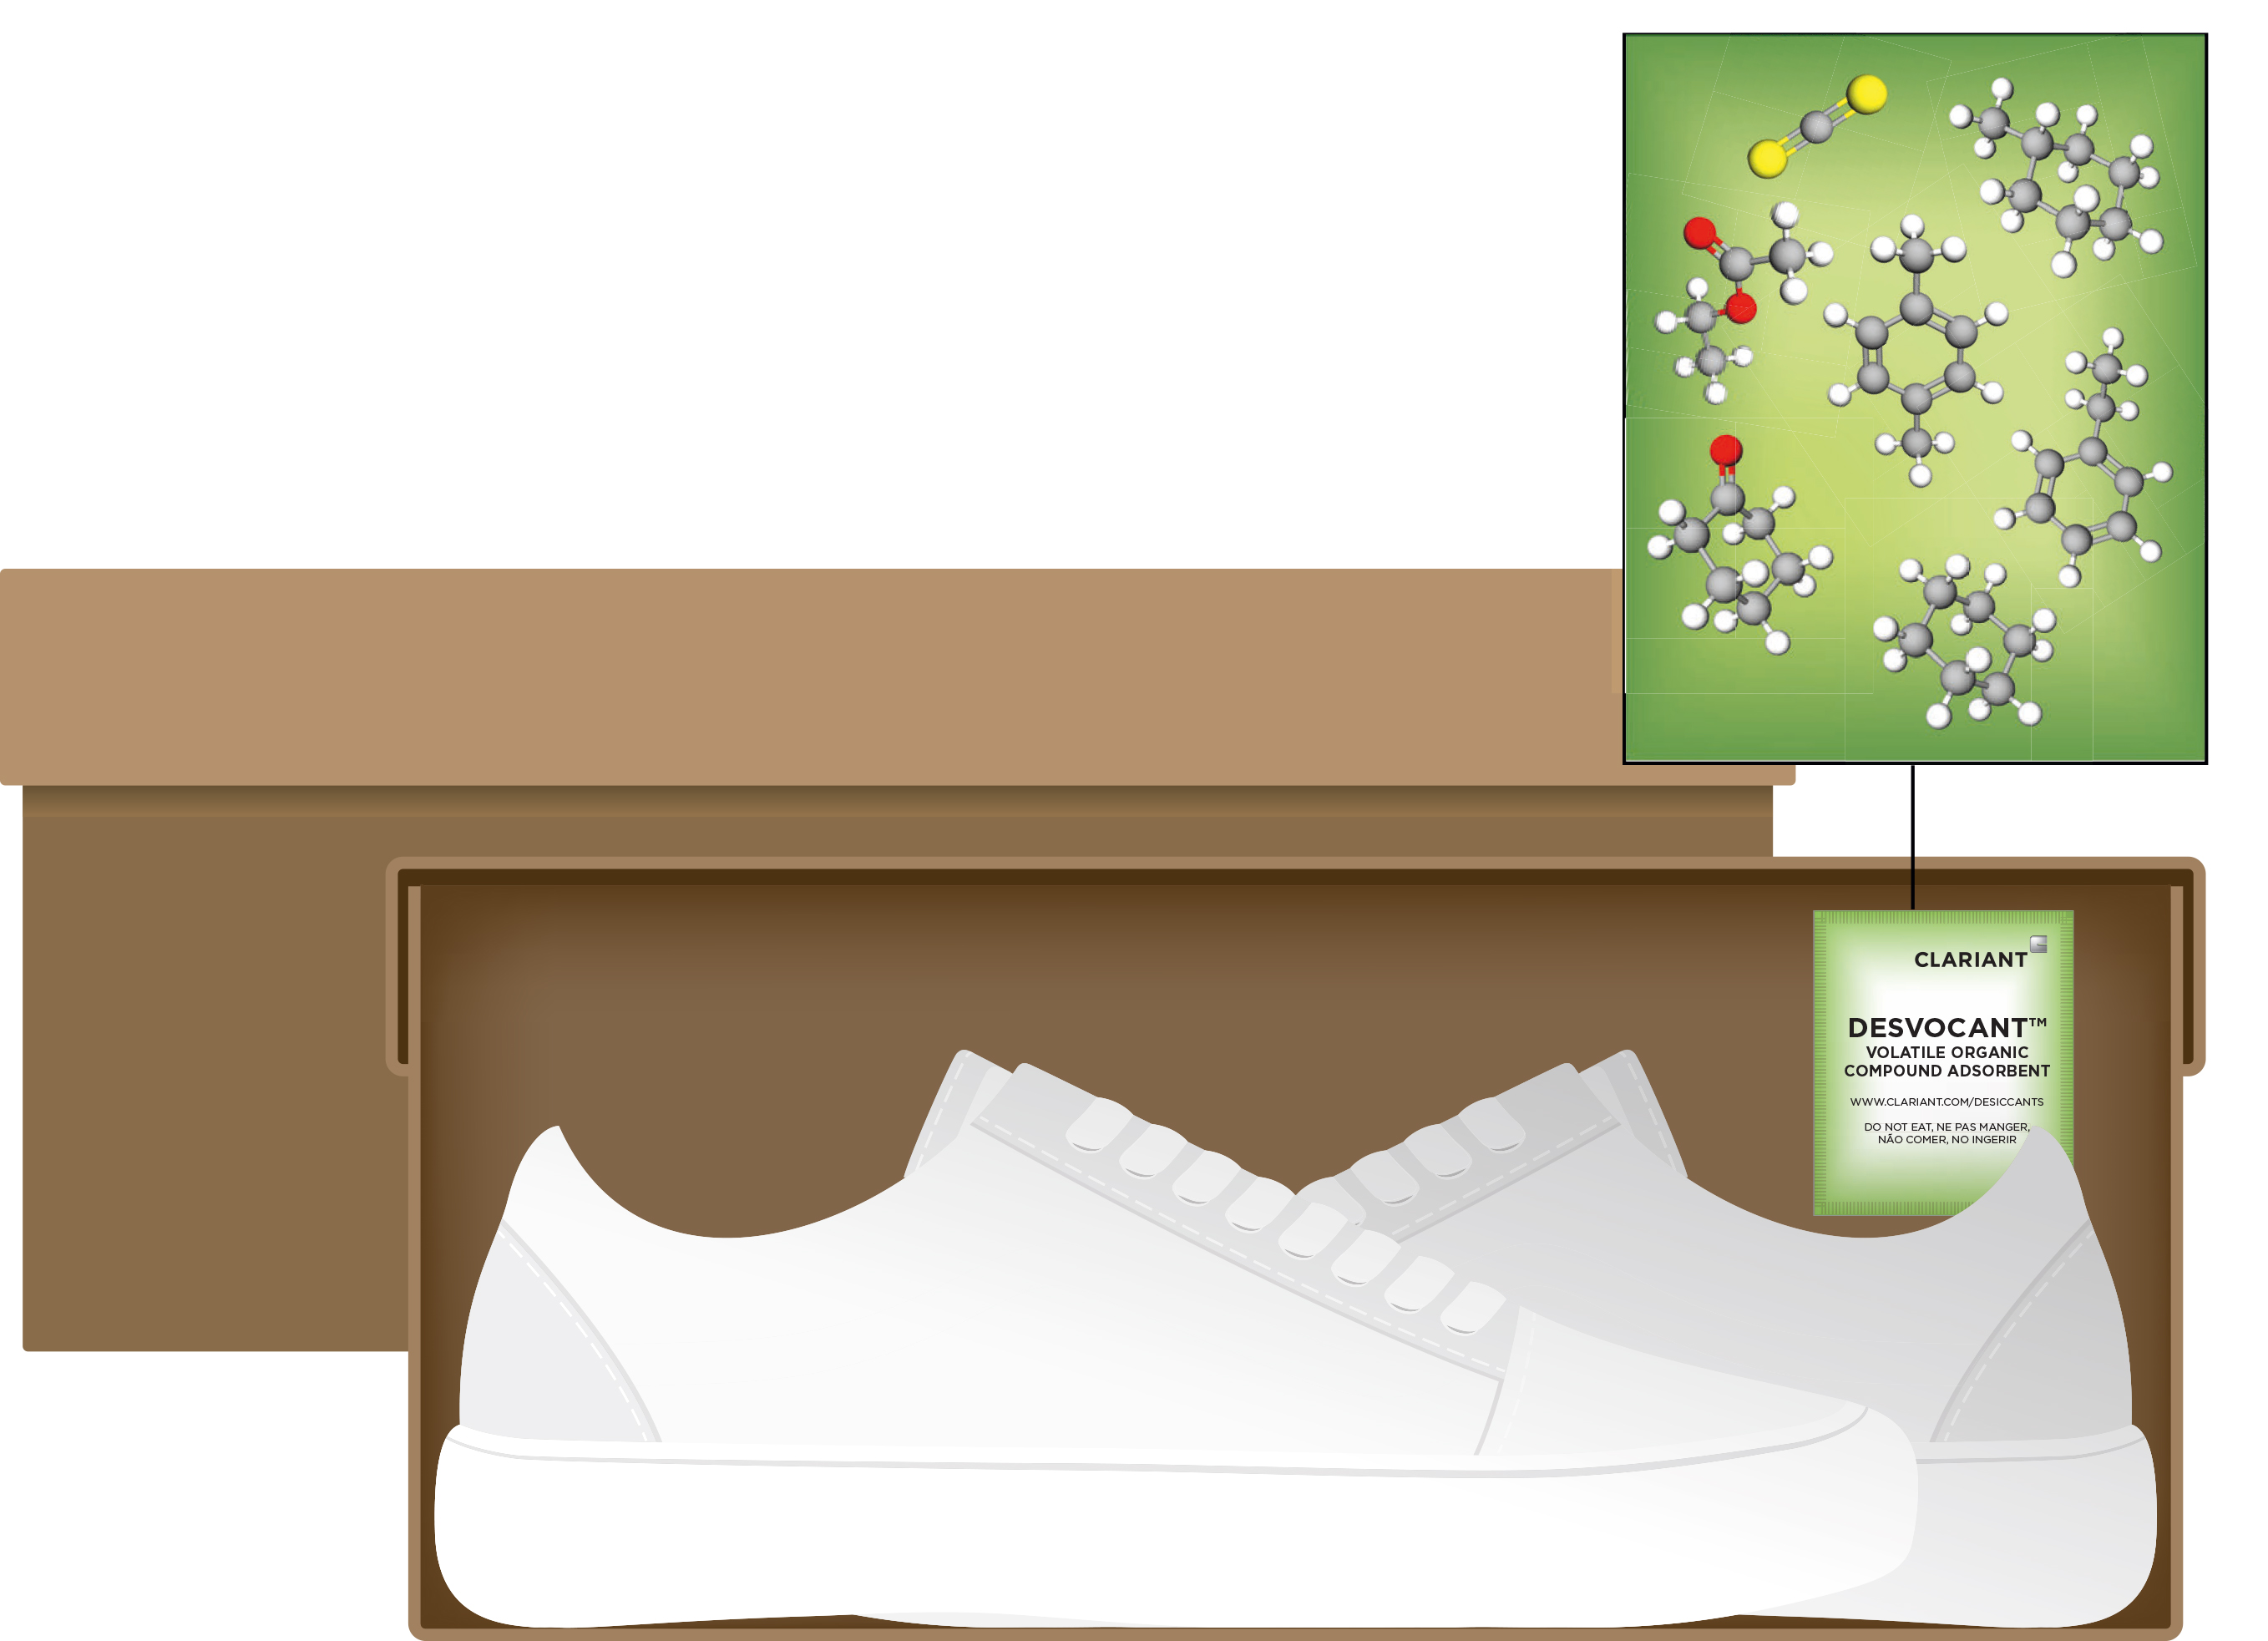 Desiccant Adsorbing Volatile Organic Compounds Off-gassing From Footwear